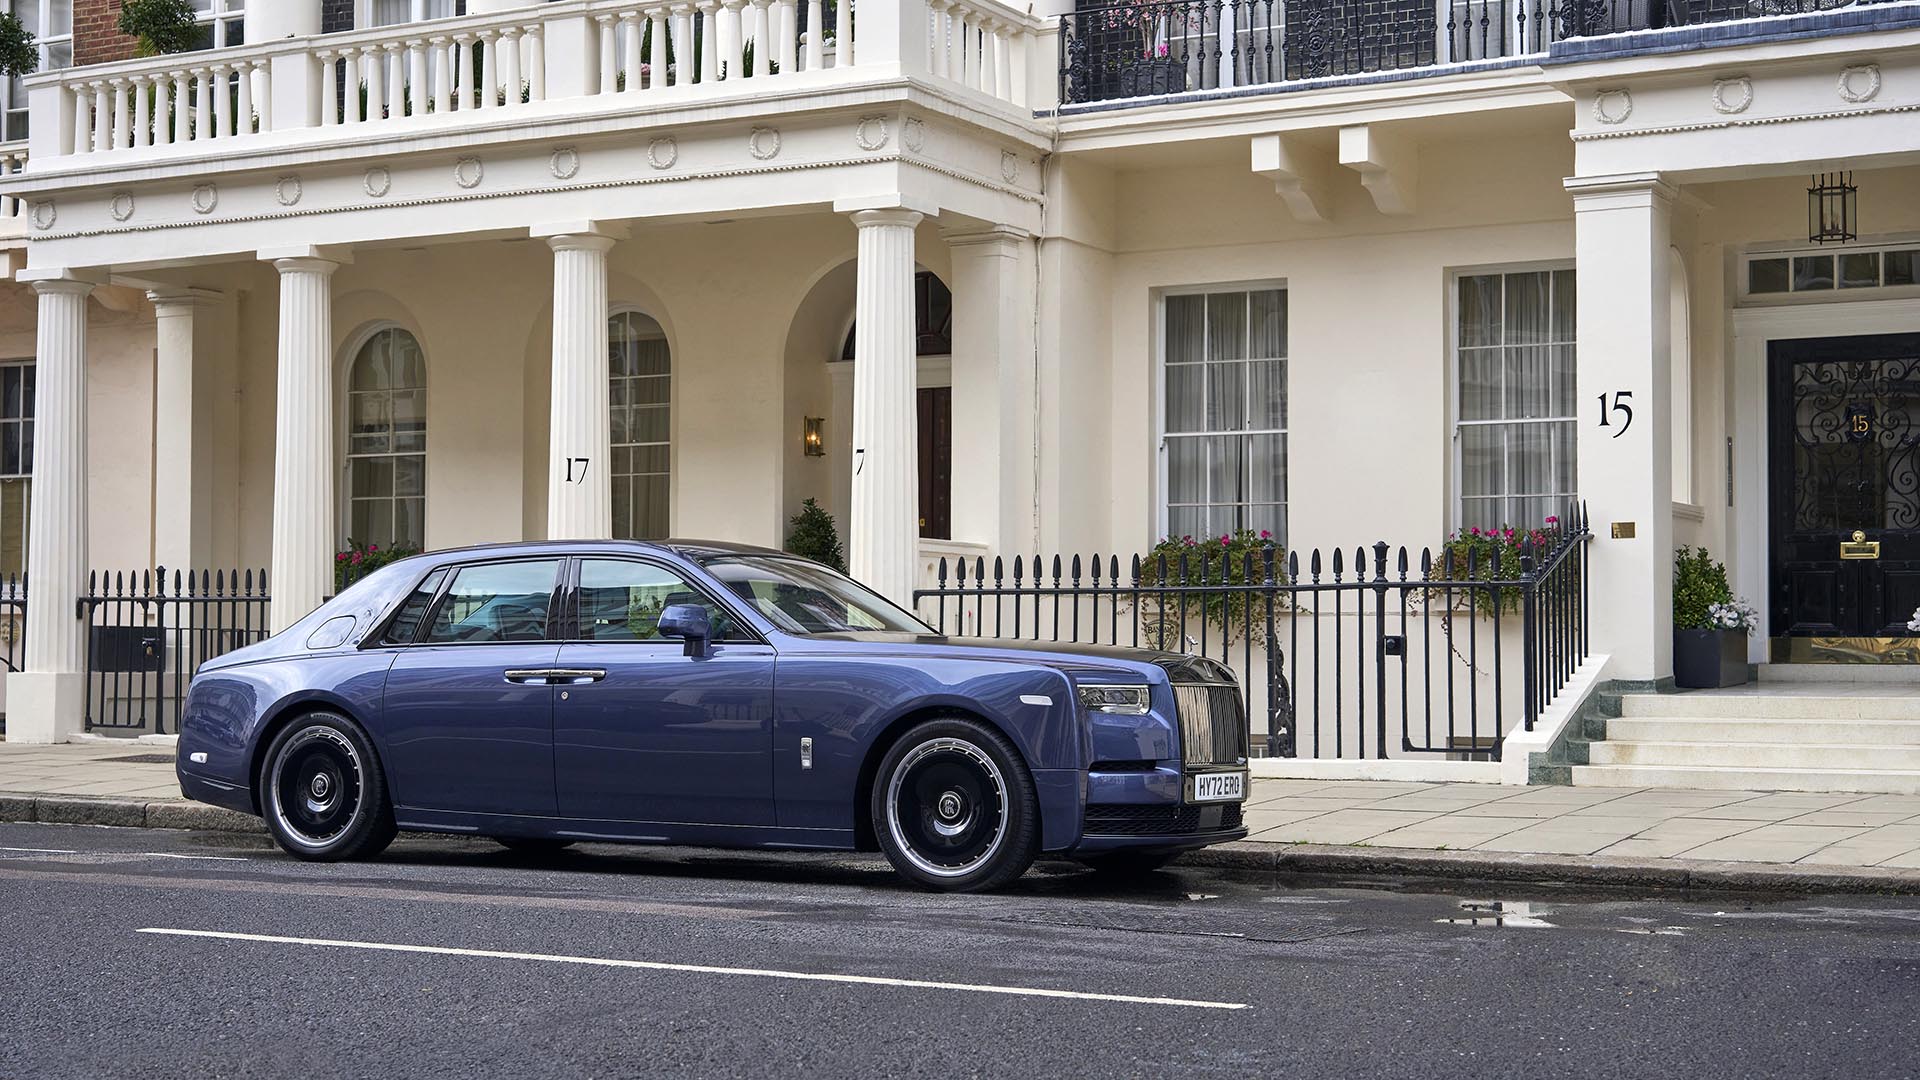 Will the UK government veto a RollsRoyce takeover